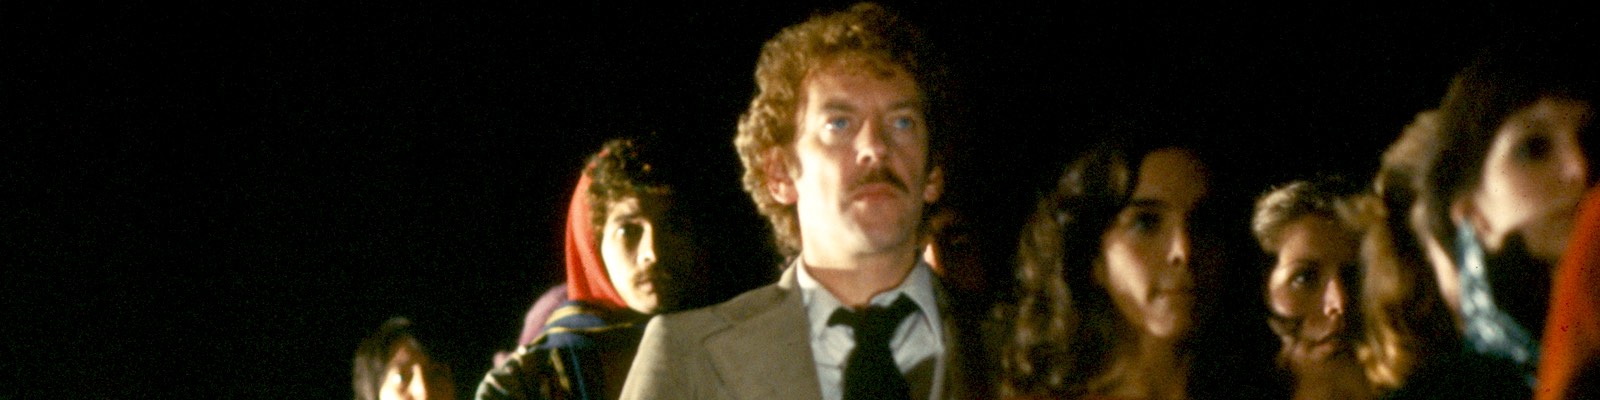 Donald Sutherland stands in a line of people in the dark in Invasion of the Body Snatchers